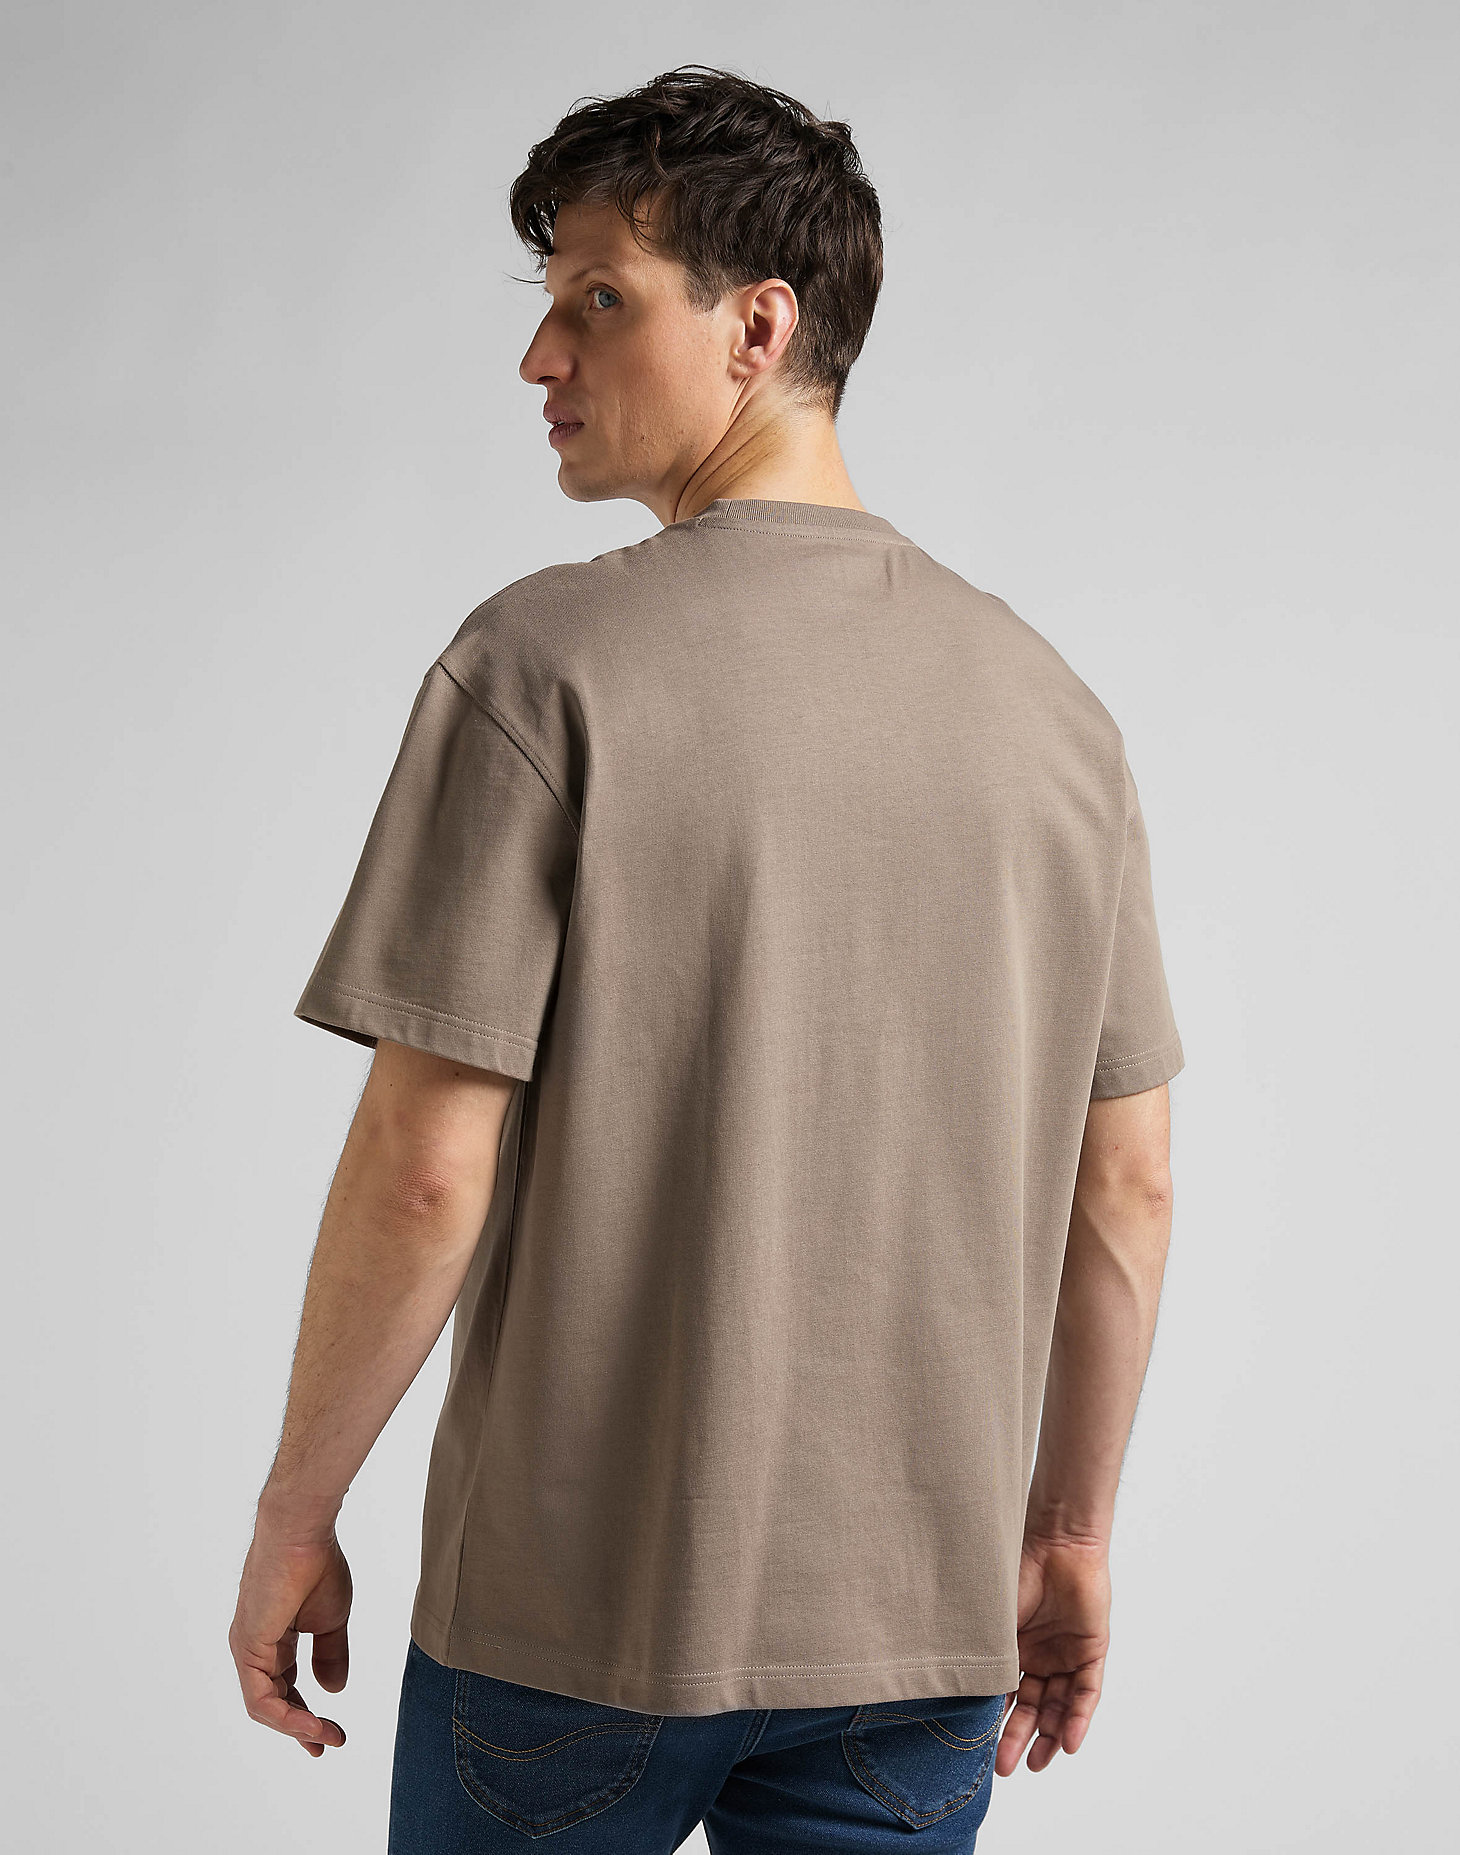 Core Loose Tee in Mid Stone alternative view 1